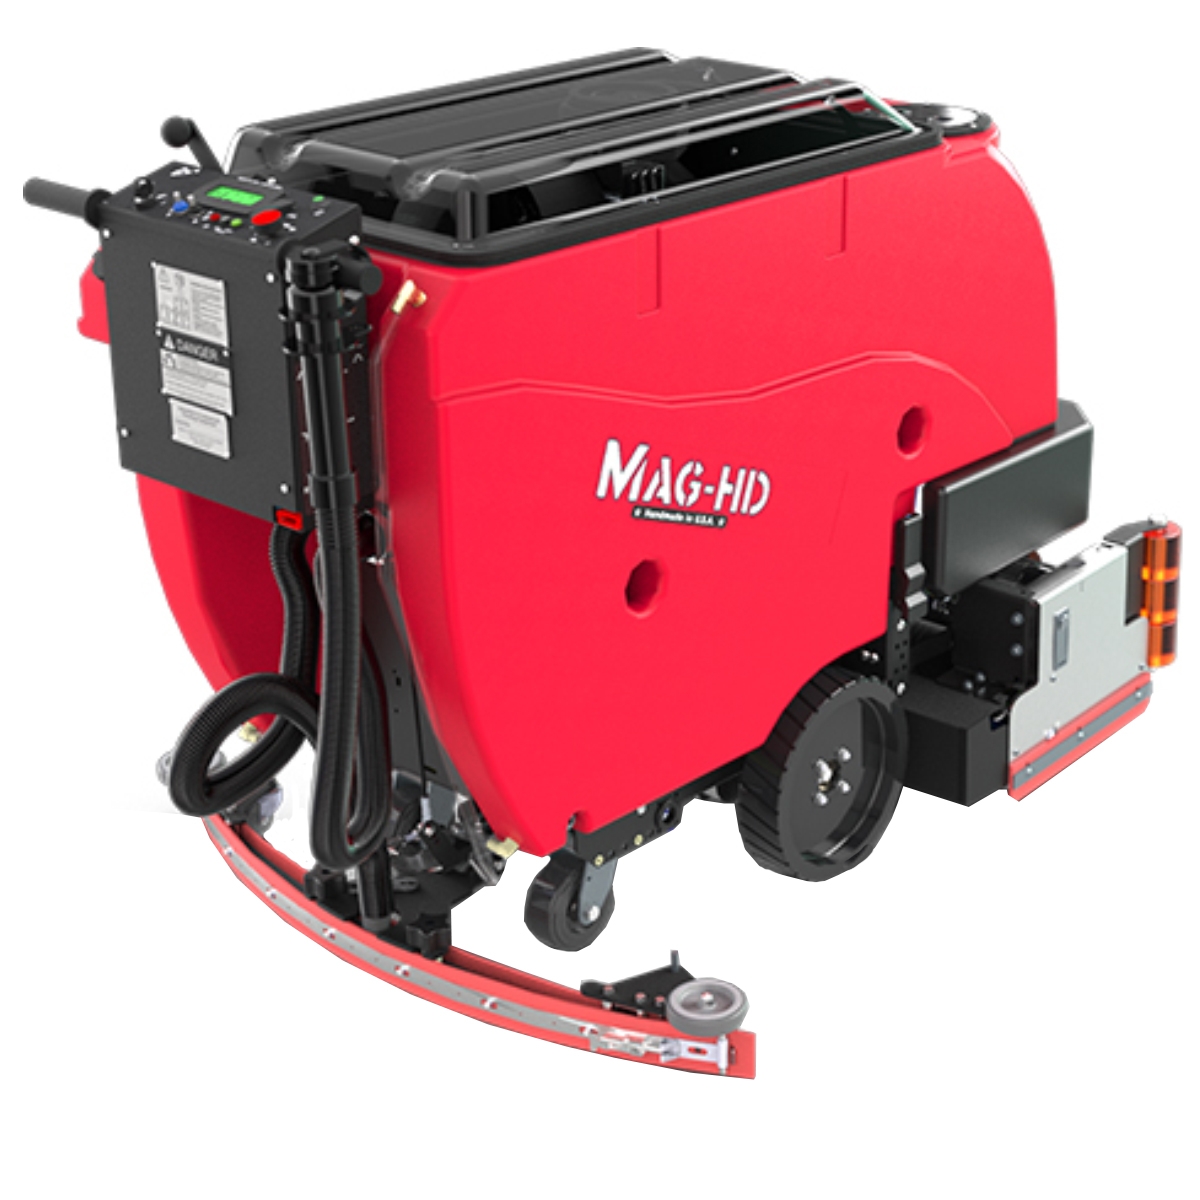 Mag-HD Walk Behind Floor Scrubber
Cleaning Path: 29-34 | Run Time: Up To 5.0 Hours | Tank Capacity: Sol: 35 Gal, Rec: 37 Gal